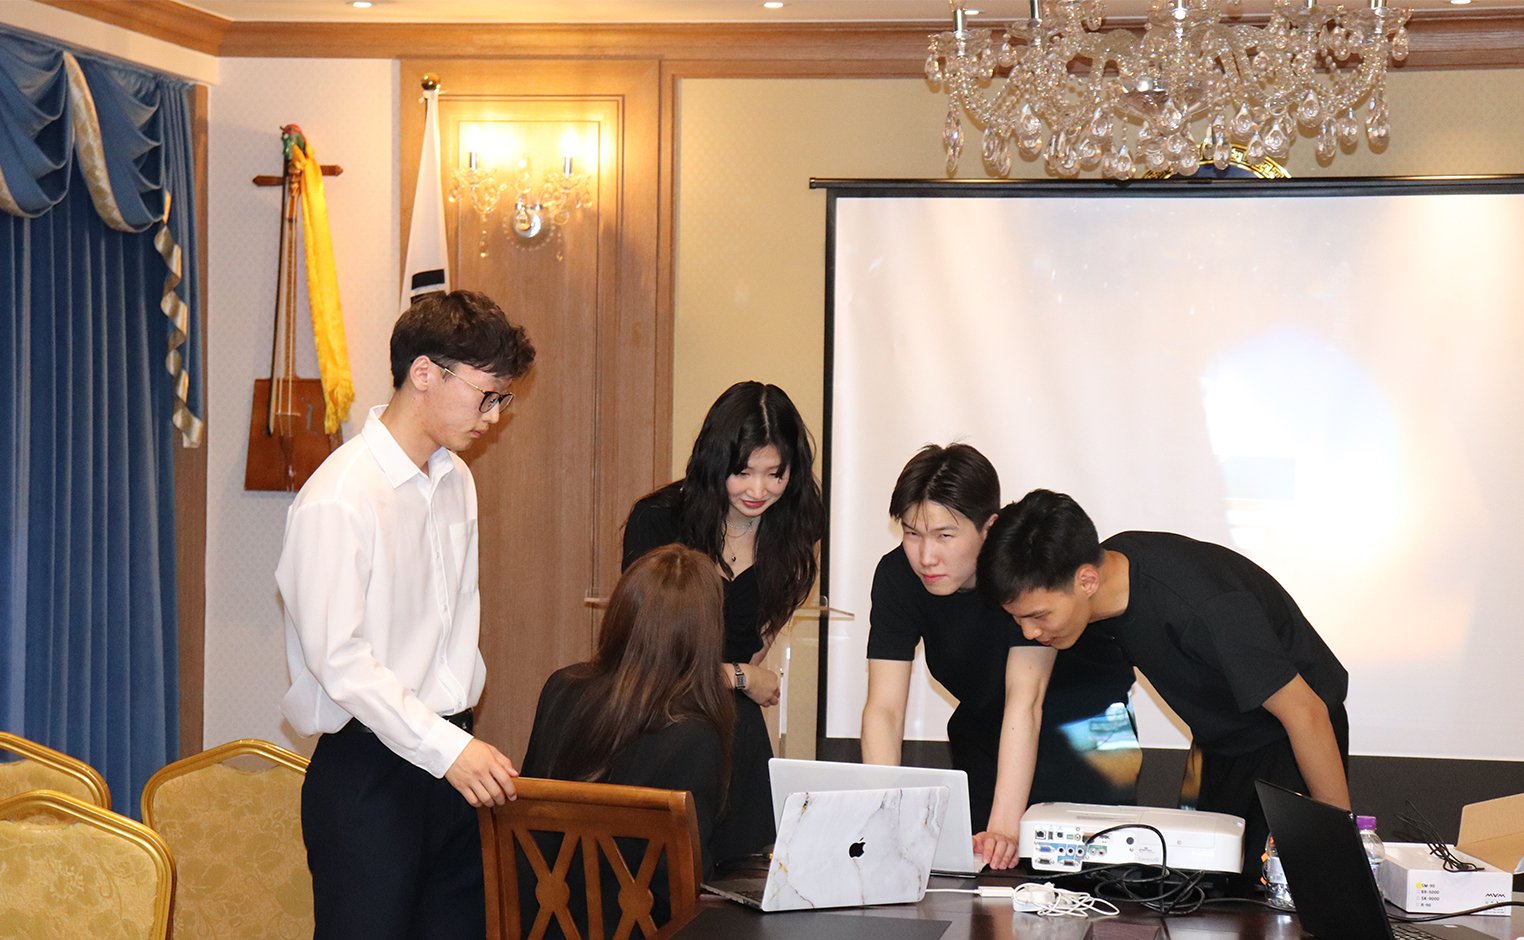 A group of students look at a computer attached to a projector.